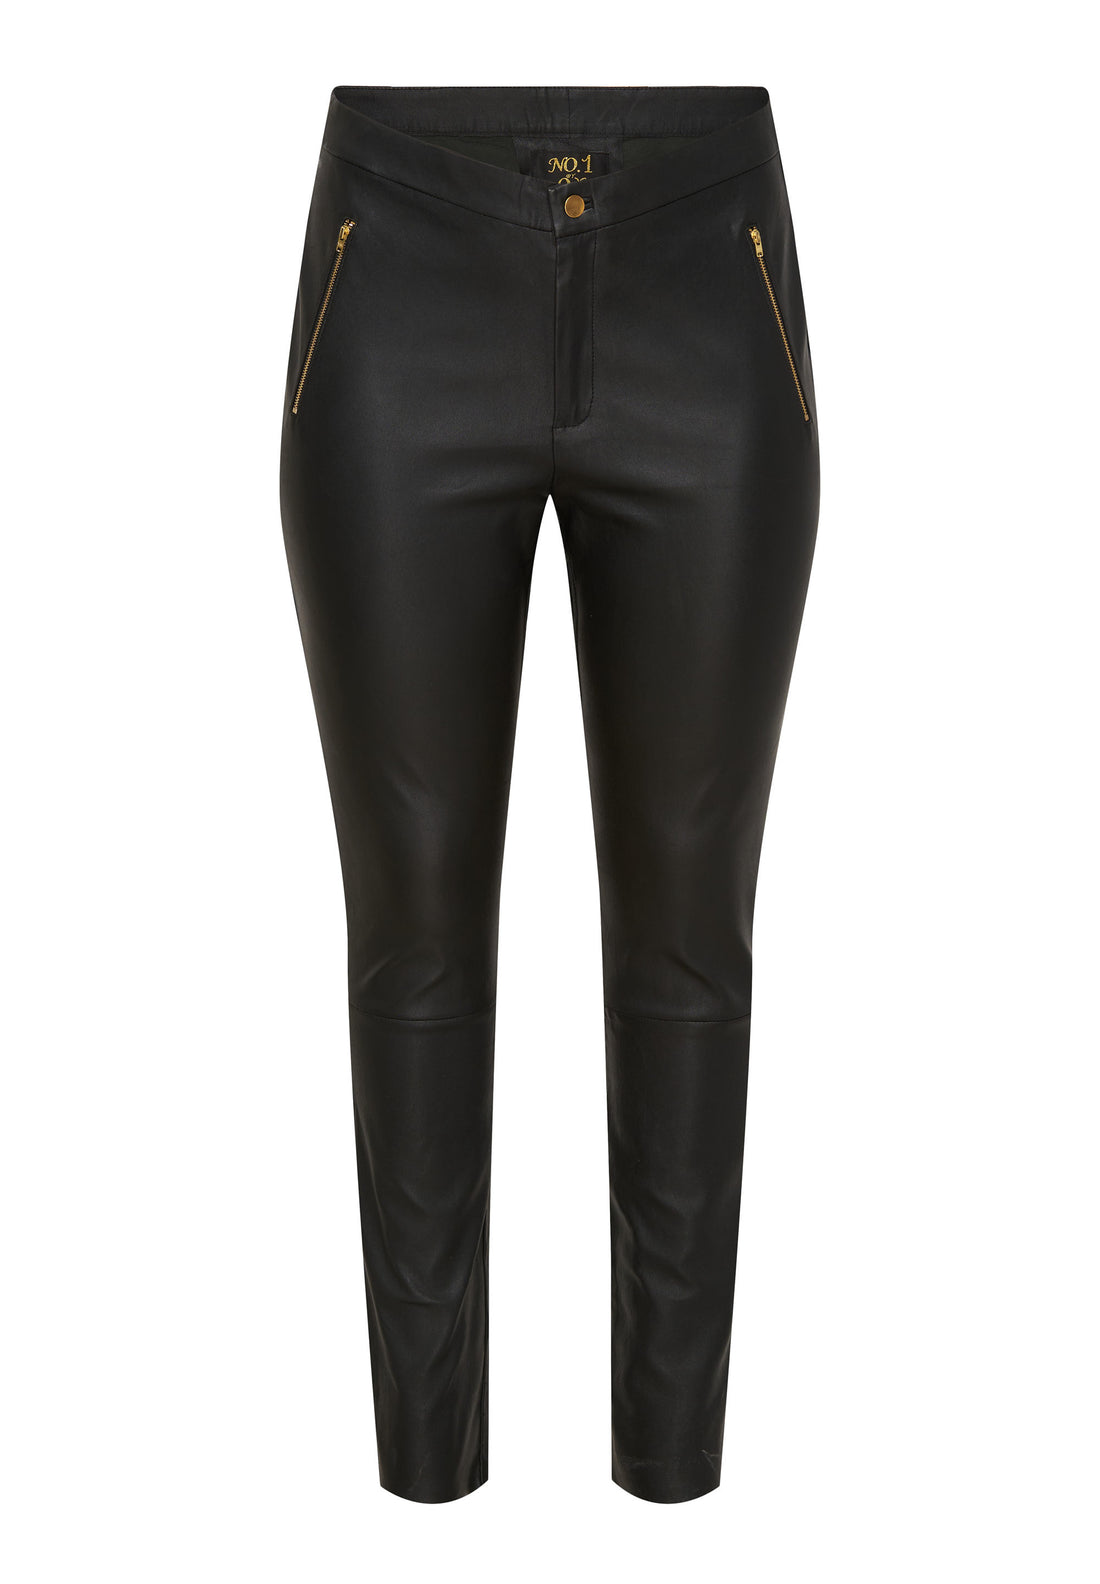 OXLeather Leggings with Gold Zippers